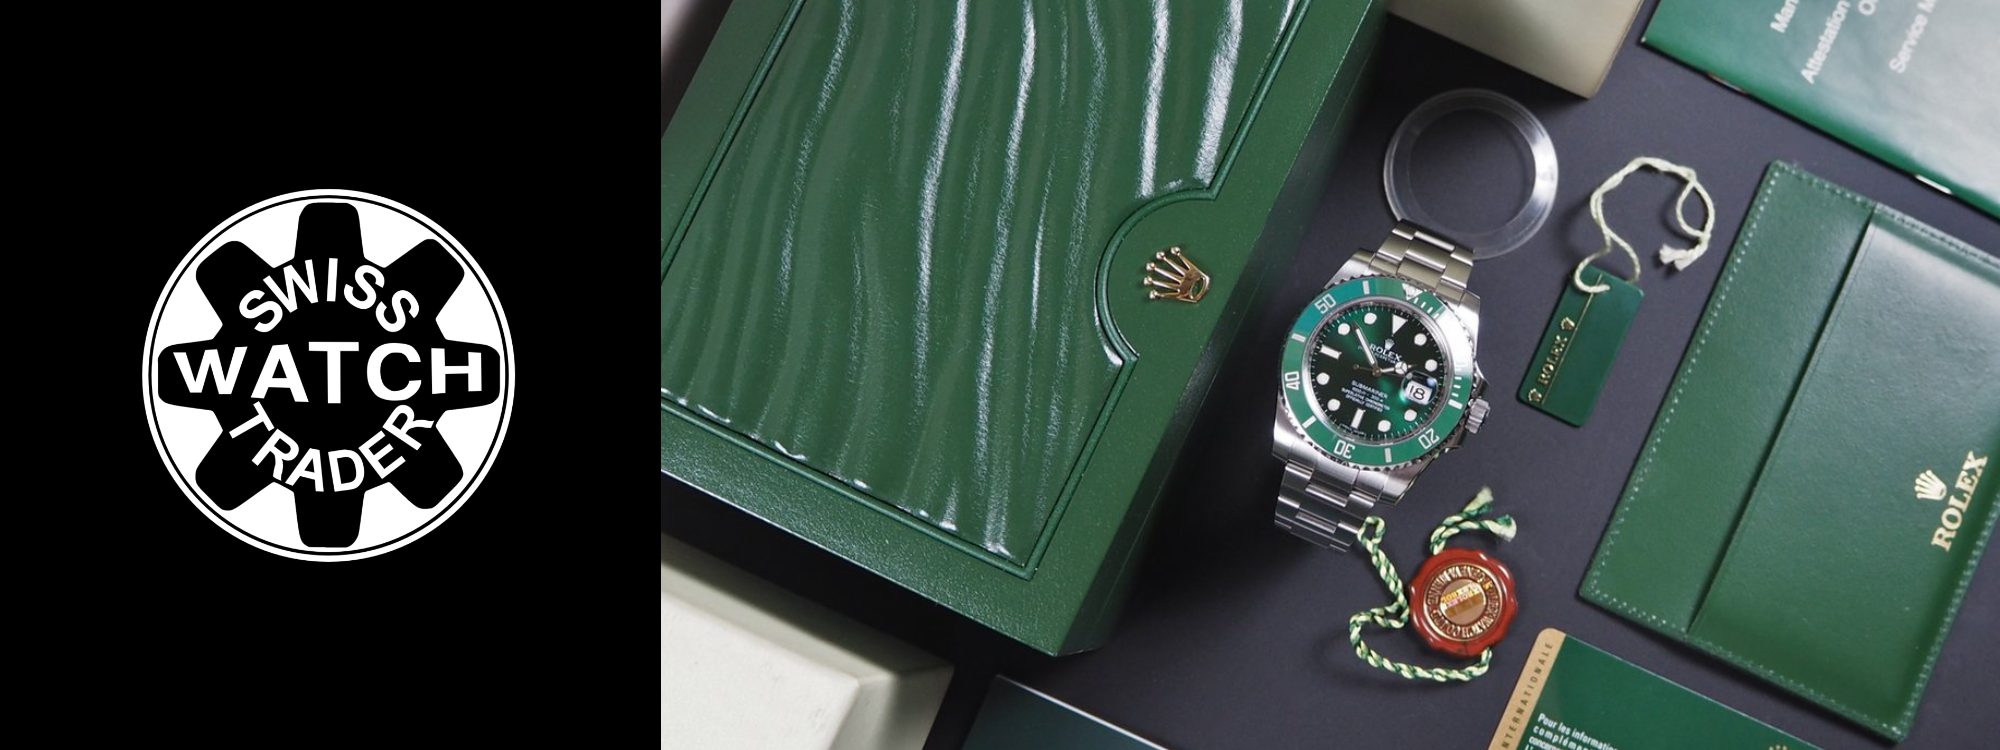 Rolex 116610LV Hulk Our Minute Review